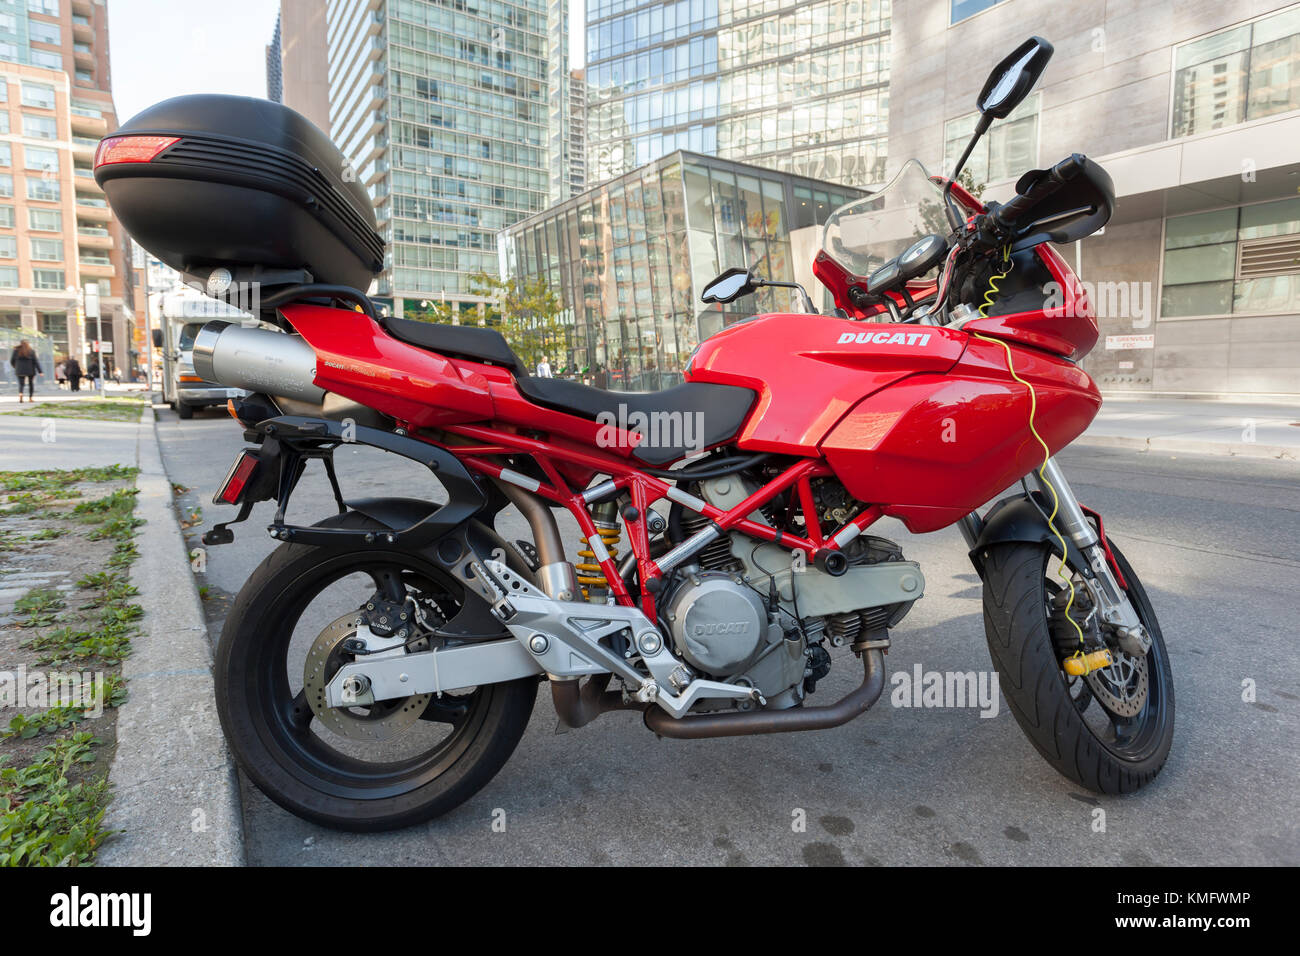 Toronto, Canada - Oct 19, 2017: Ducati Multistrada motorcycle parked in a street downtown of Toronto, Canada Stock Photo